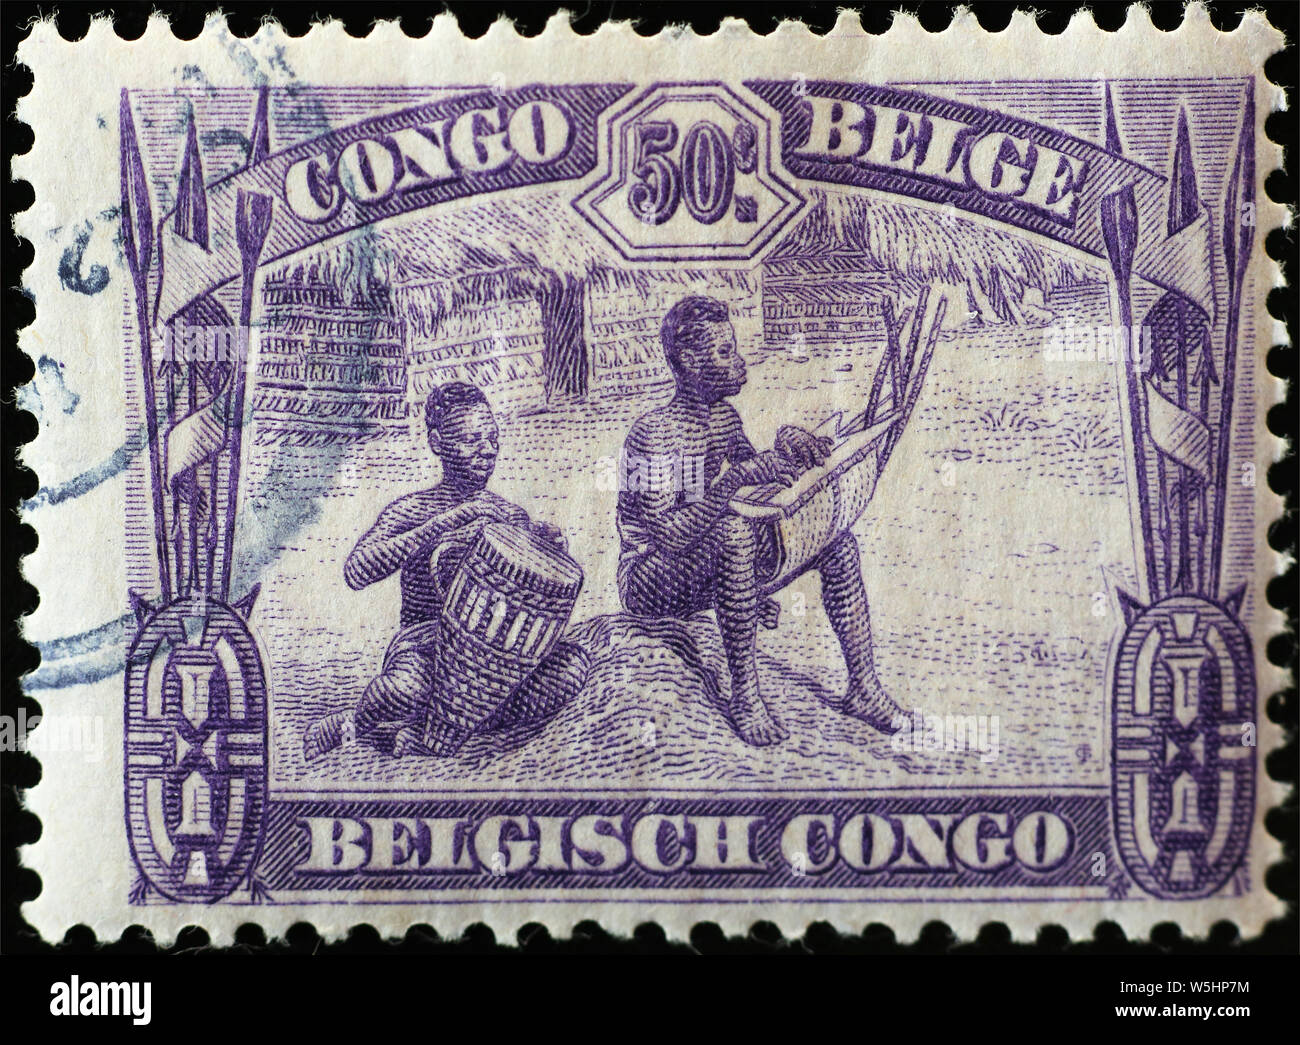 Two men playing instruments on antique african stamp Stock Photo